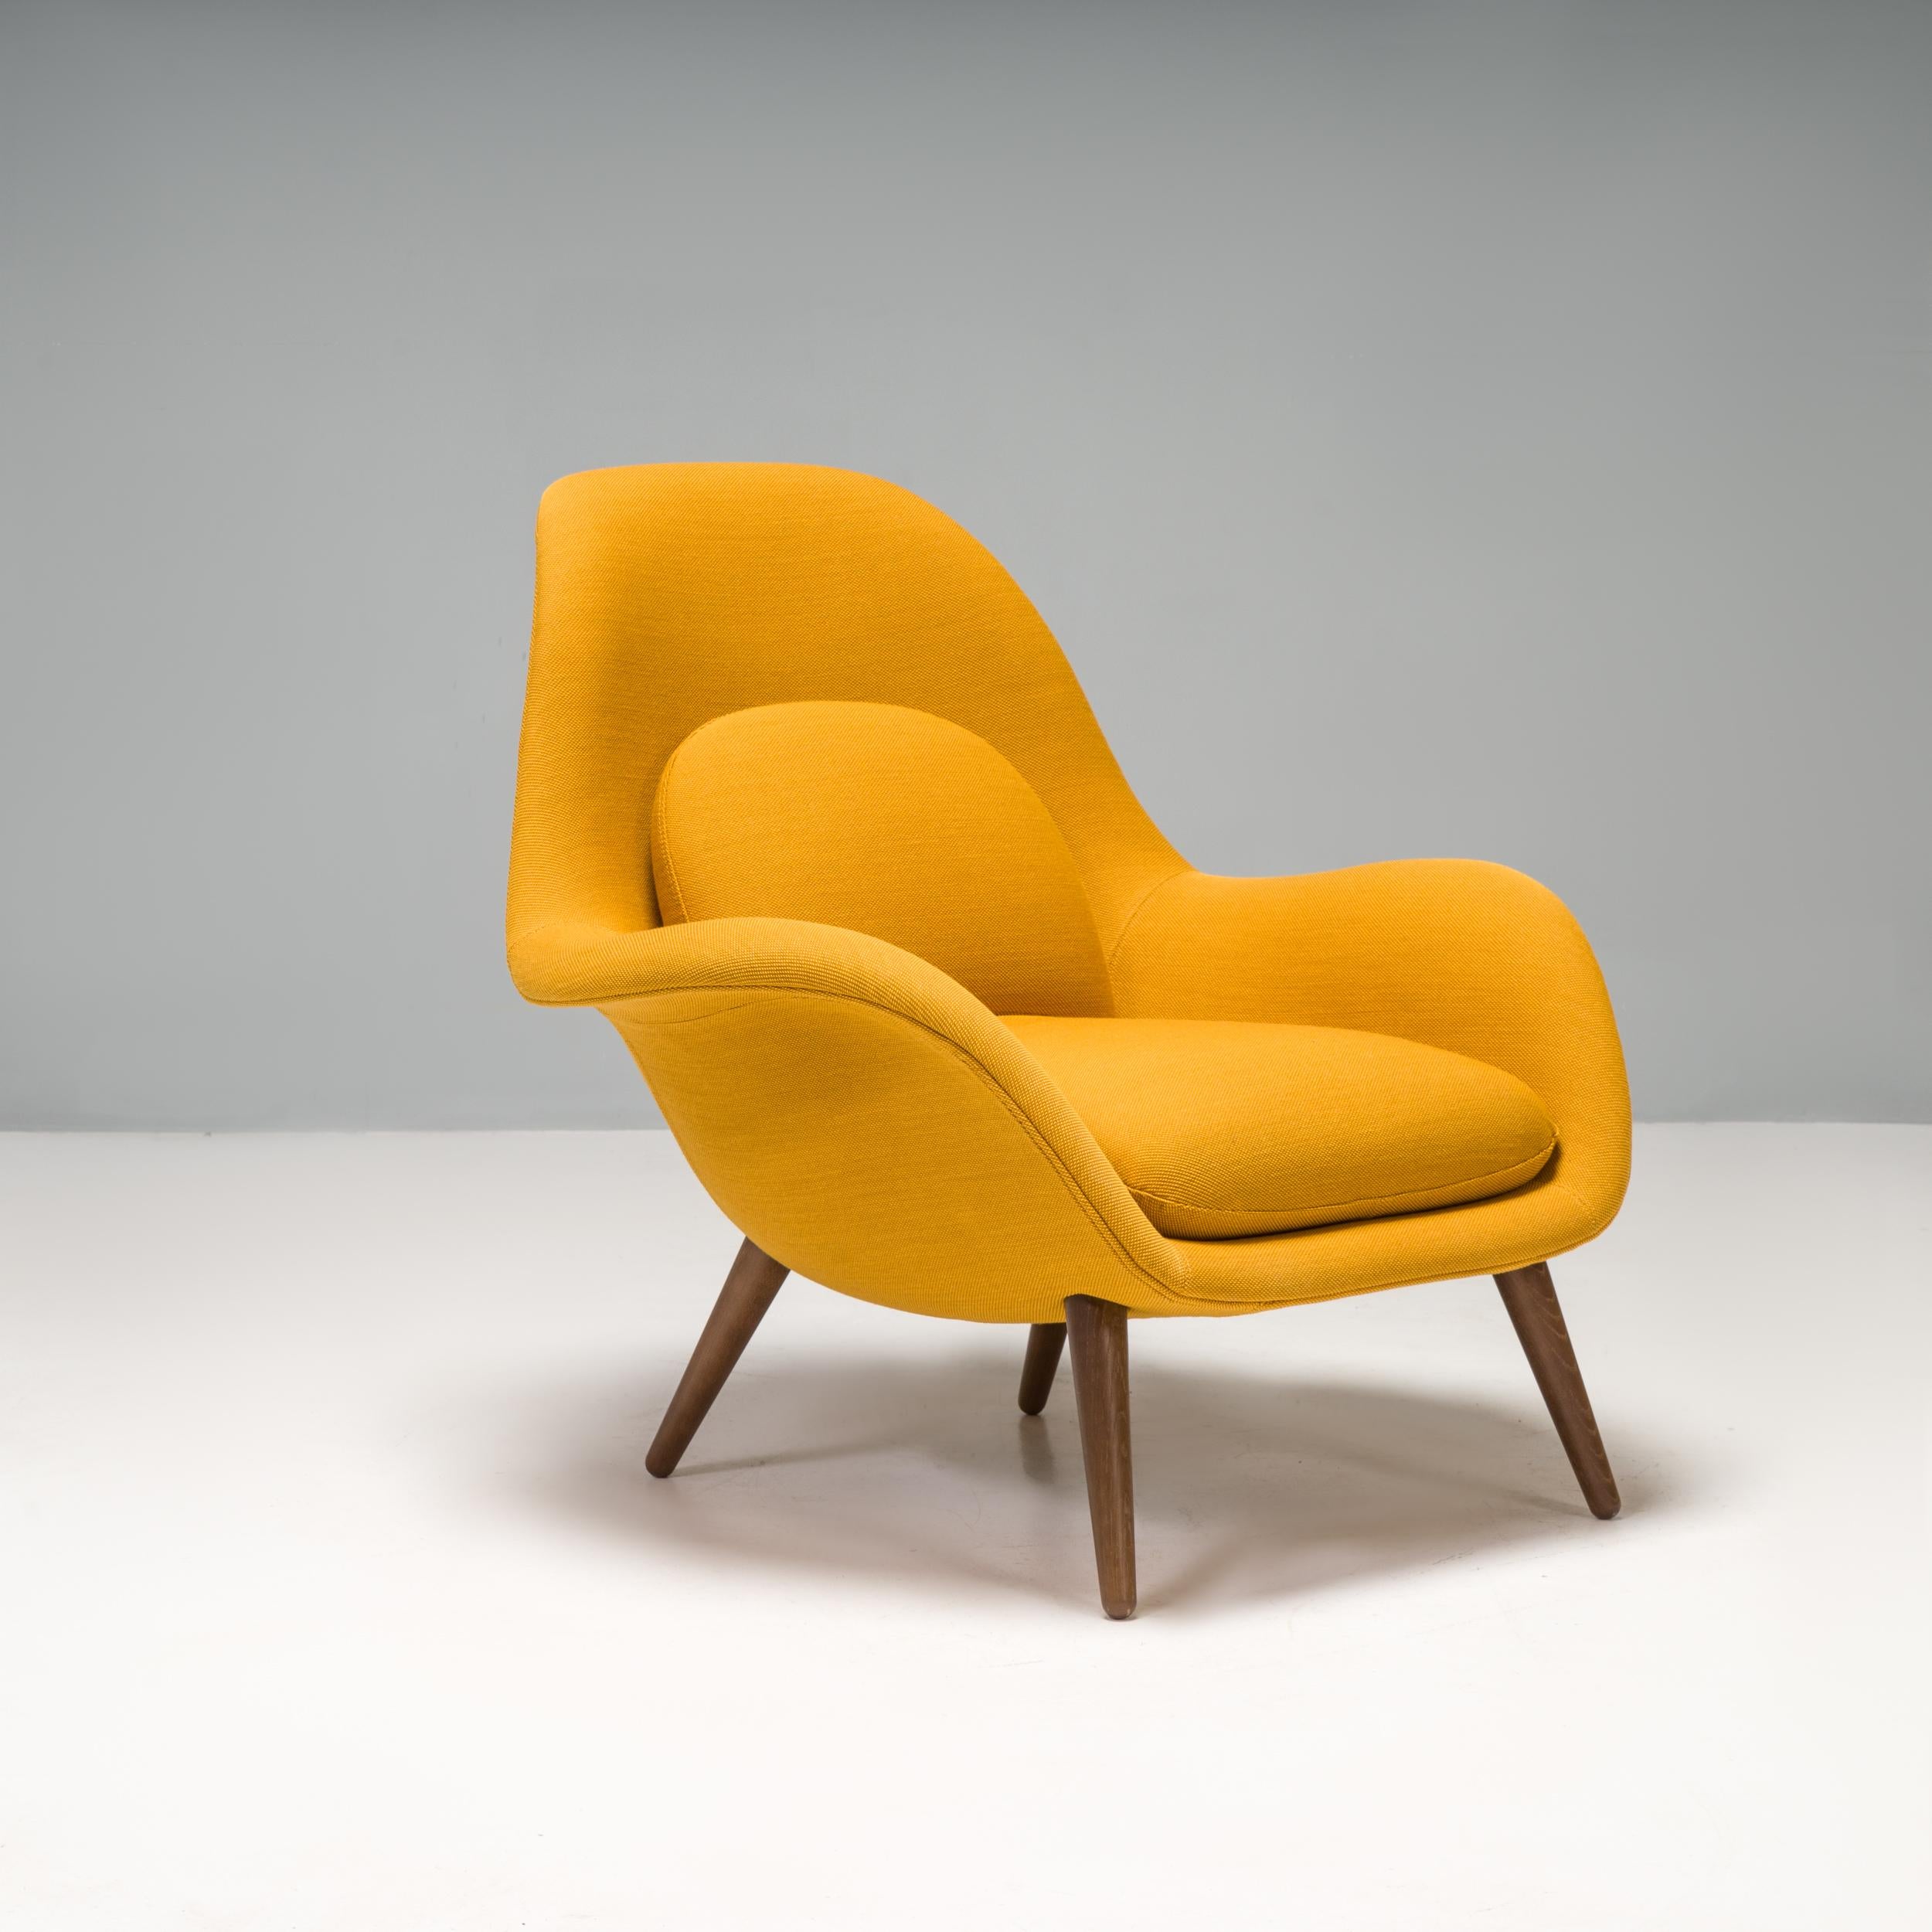 Designed by Space Copenhagen for Danish furniture manufacturer Fredericia, this Swoon armchair was made in 2021.

Featuring a lacquered walnut frame, the chair has a sculptural silhouette with a high curved back, giving a contemporary update to the